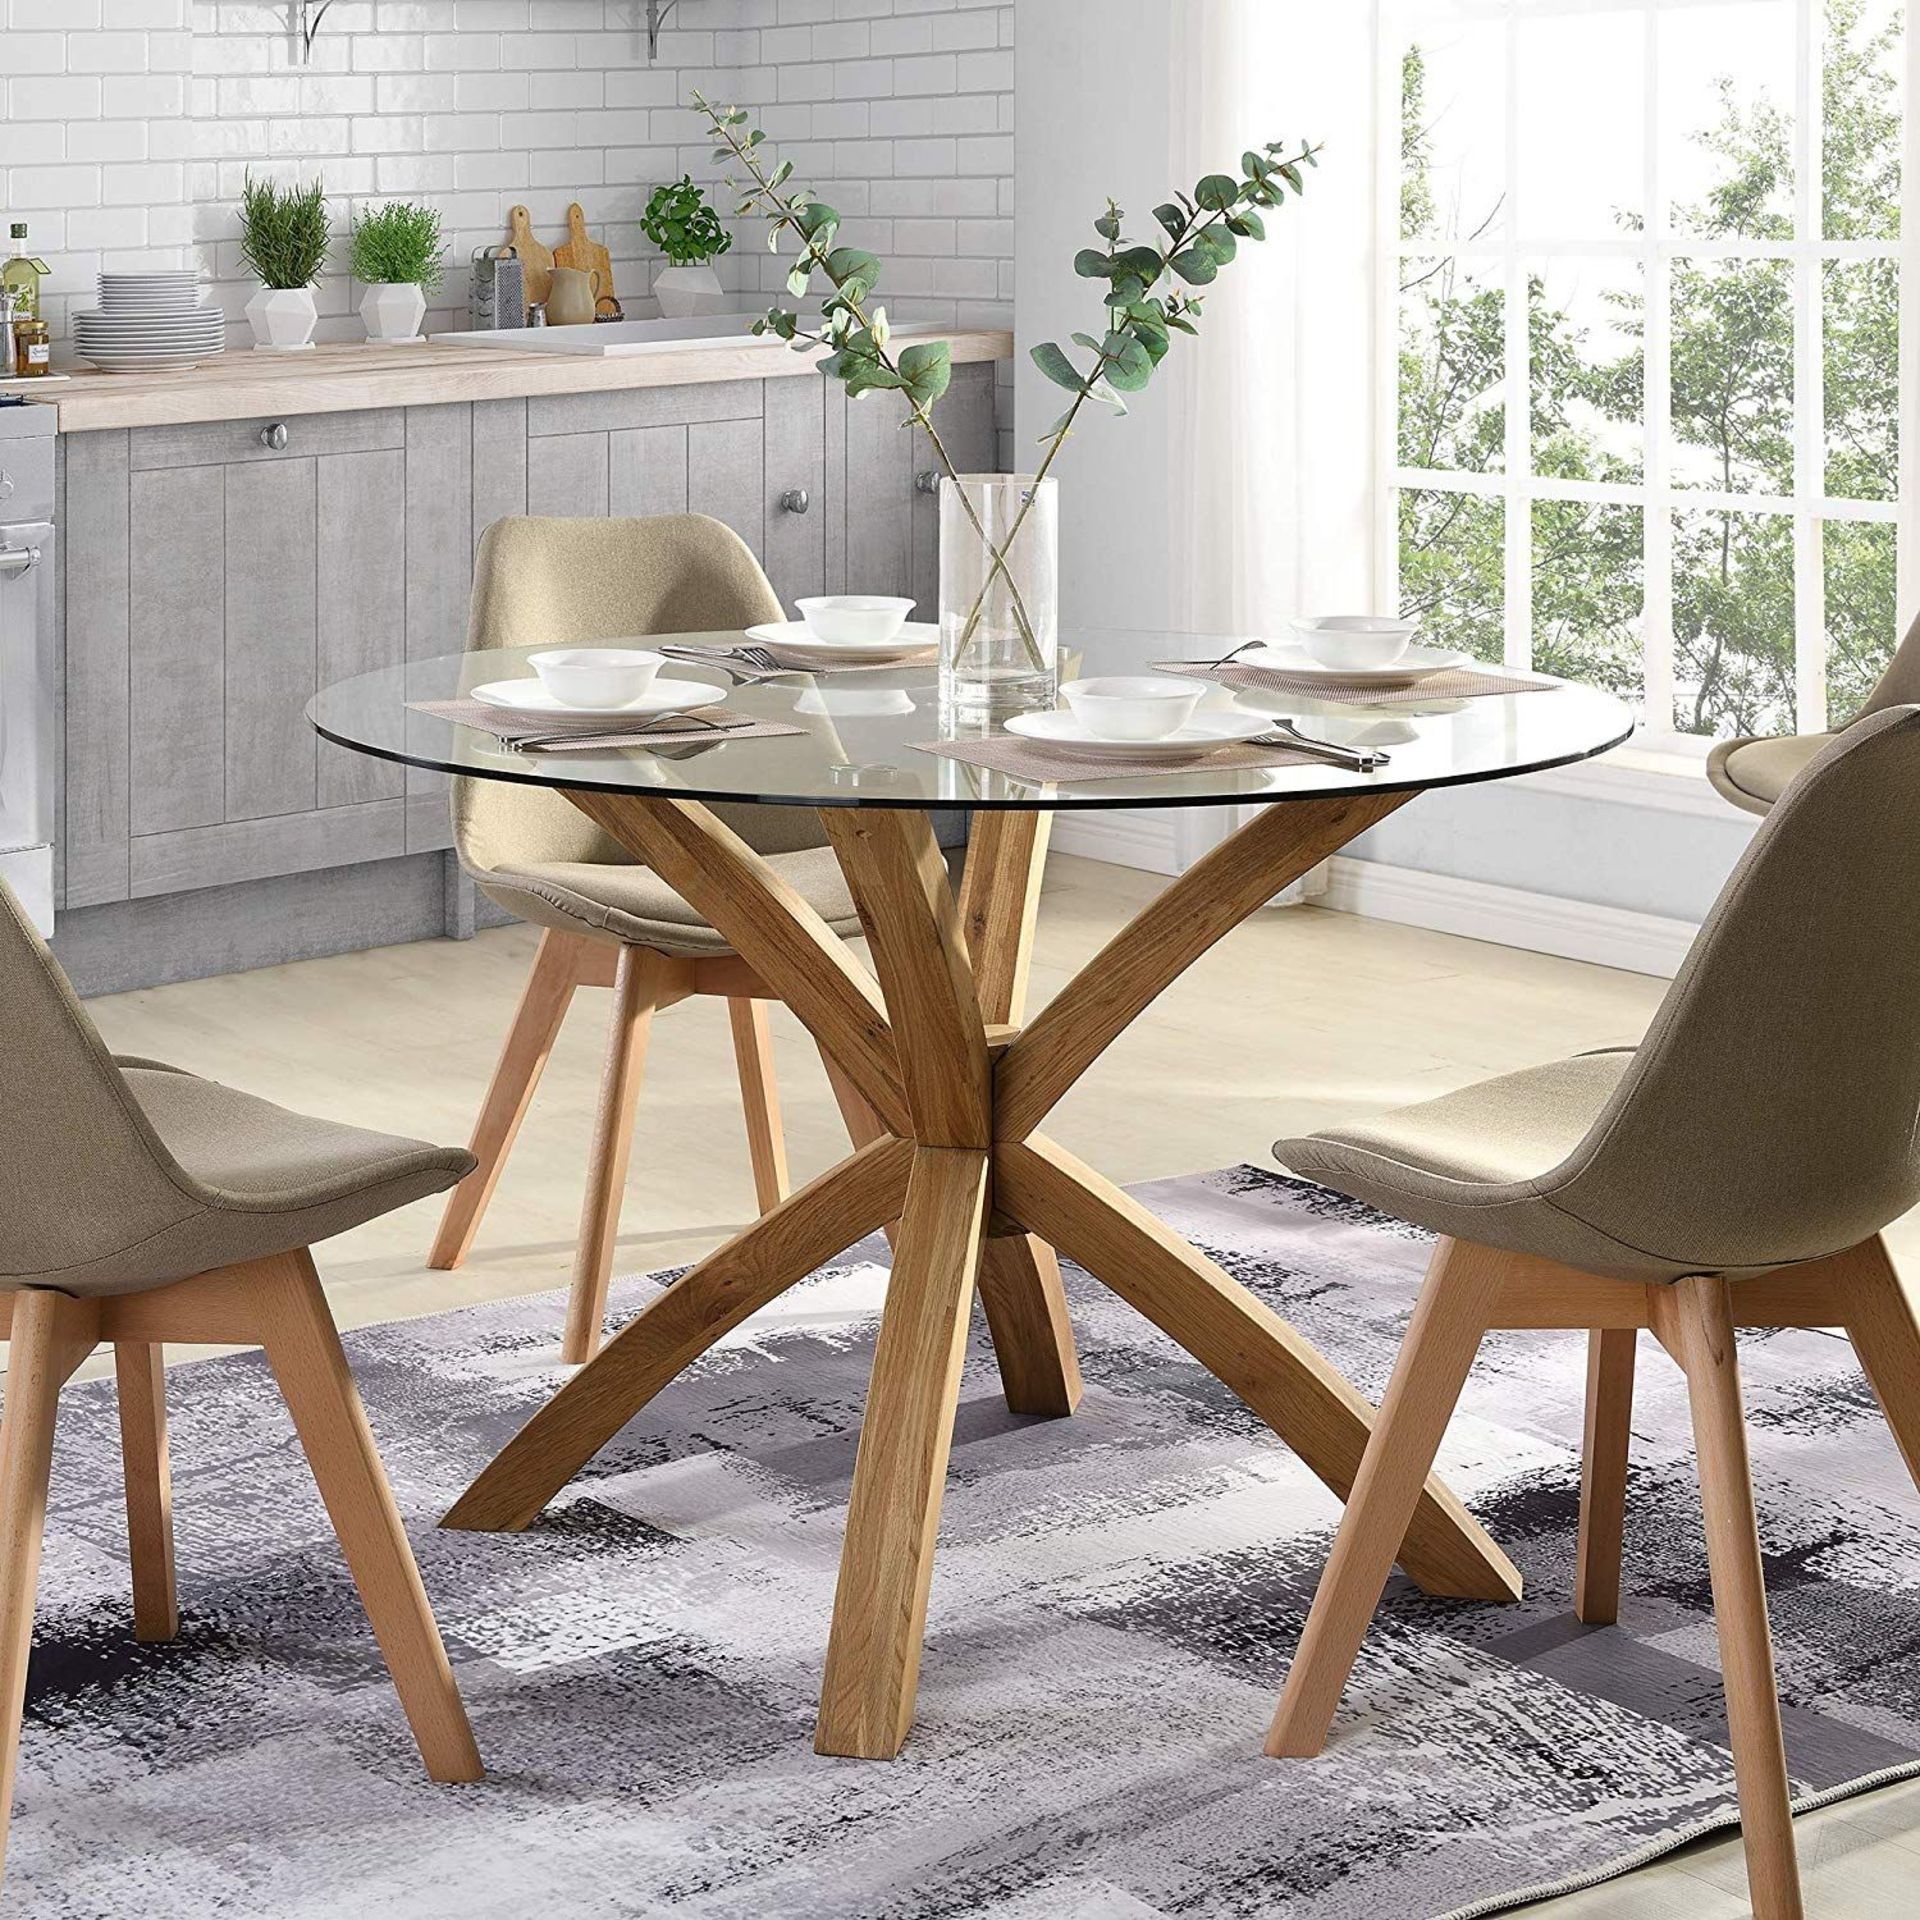 Lugano 110cm Round Glass Top Solid Oak Legs Dining Table. - ER26. RRP £379.99. Featuring four subtly